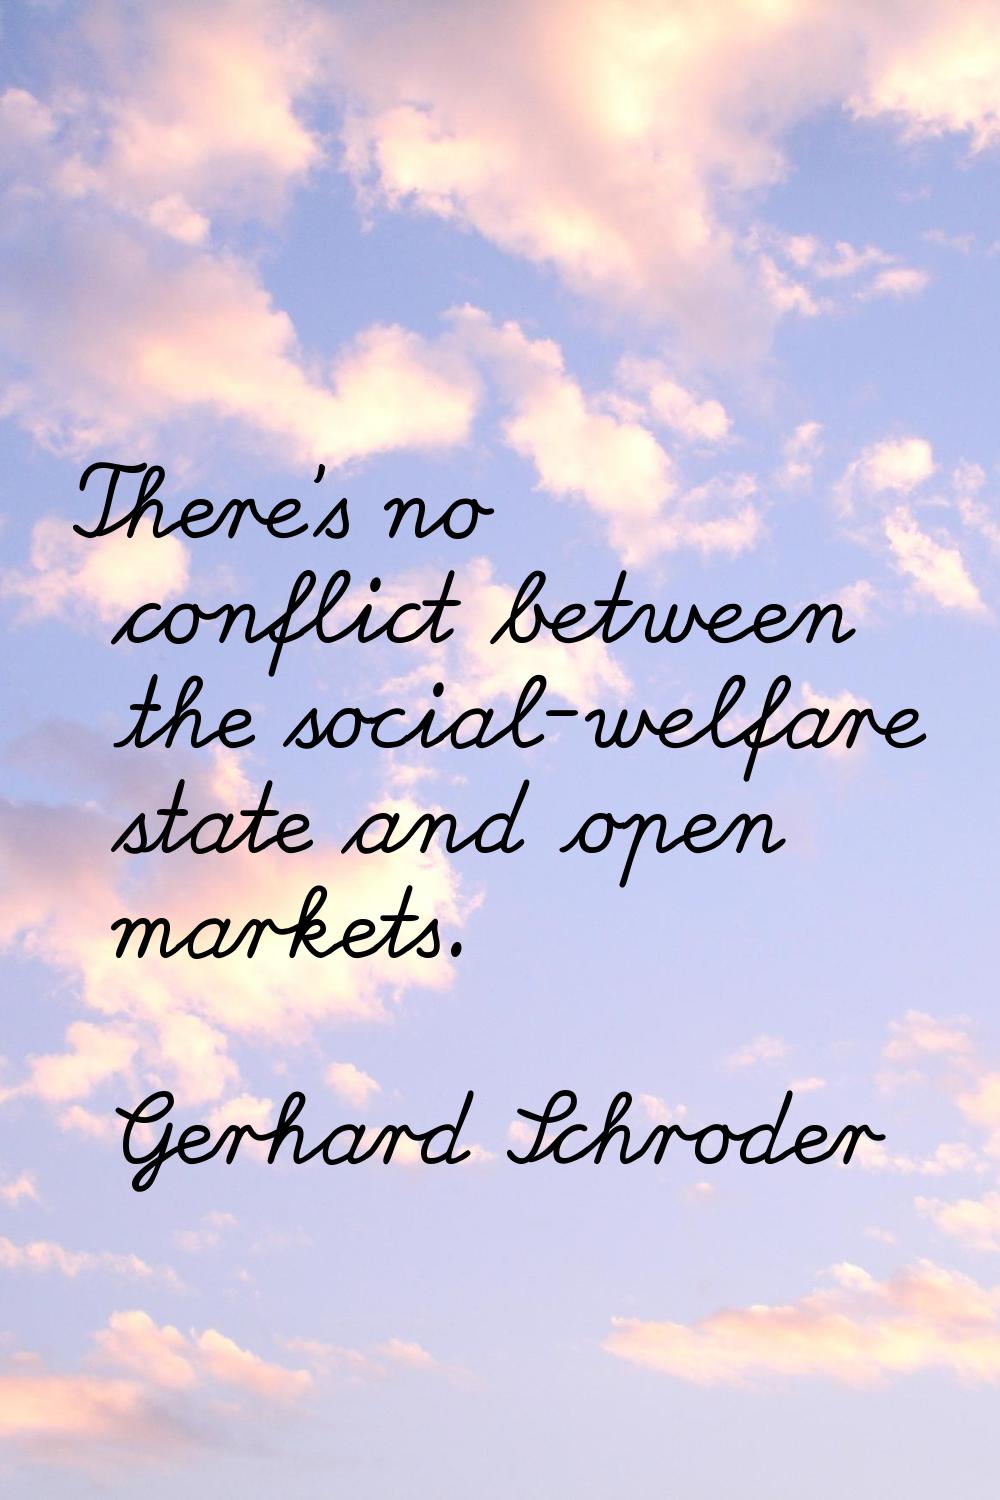 There's no conflict between the social-welfare state and open markets.